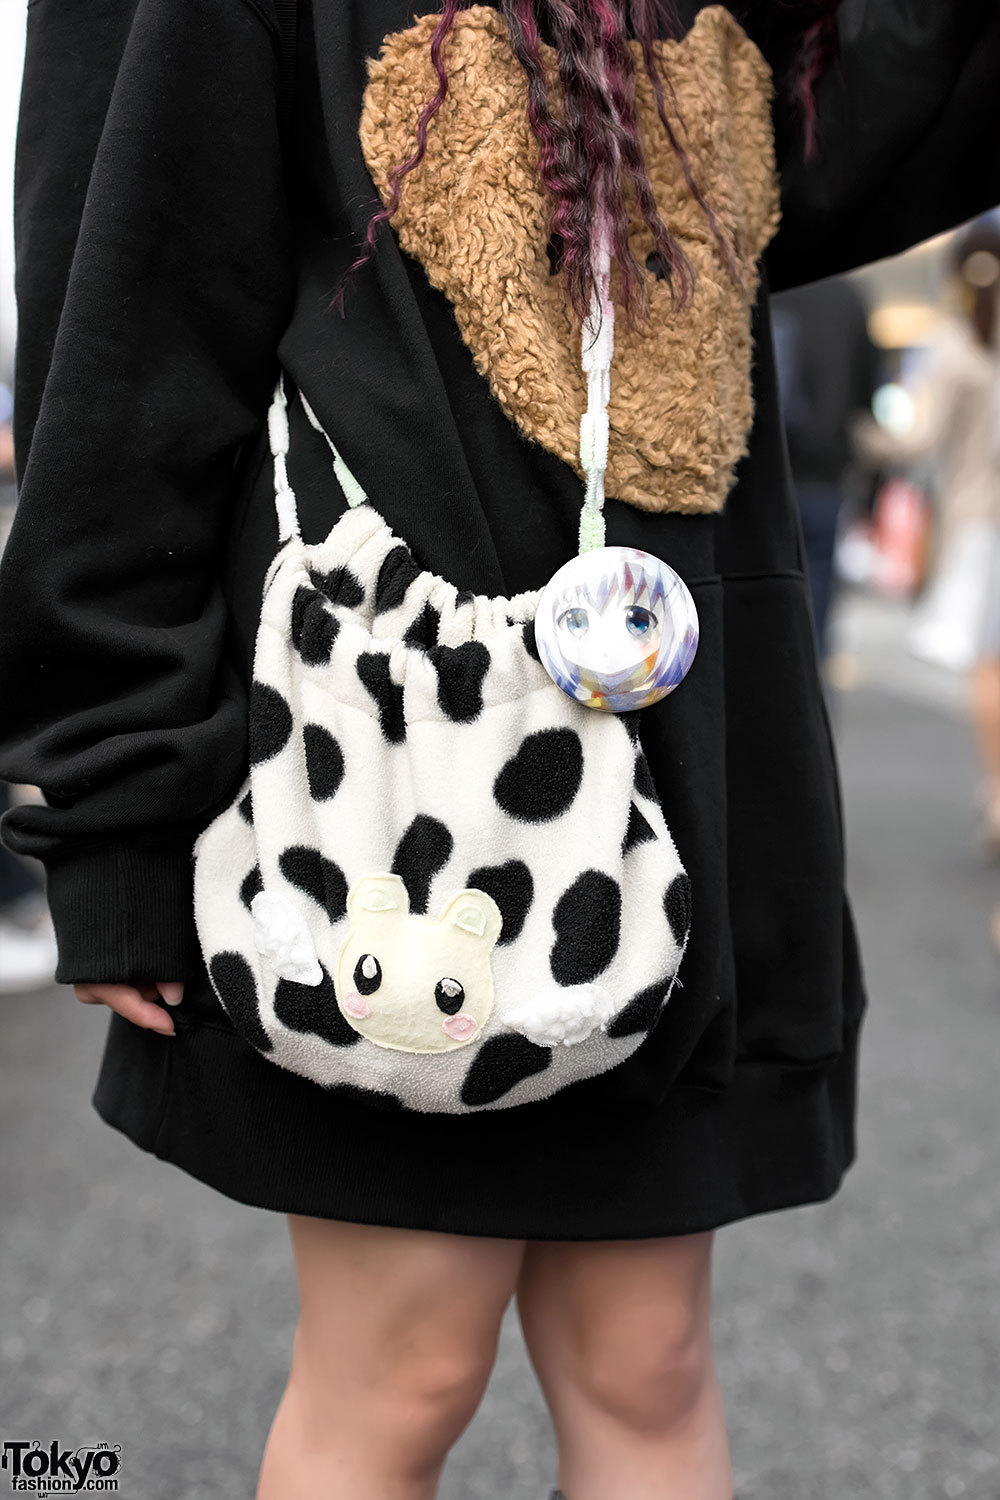 tokyo-fashion:  Colomo and Melochicon - both 19 - on the street in Harajuku wearing